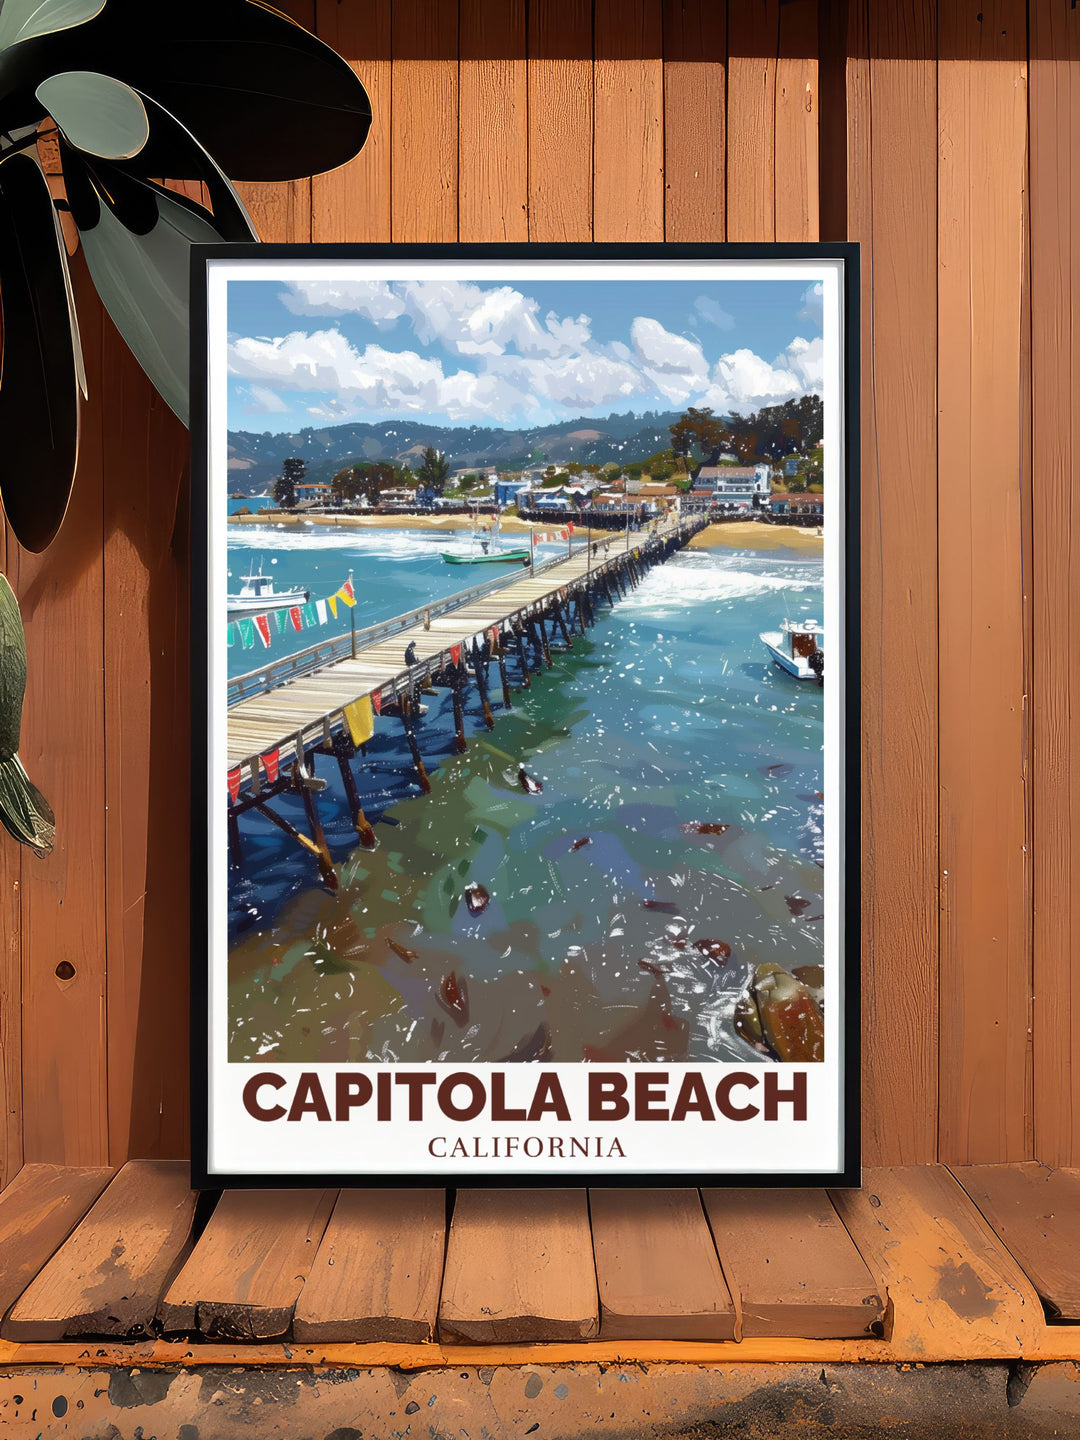 Detailed Capitola Wharf Vintage Print featuring the Wharfs scenic charm a perfect piece of California art for those who appreciate the beauty of coastal scenes ideal for home decor and as a special gift for loved ones